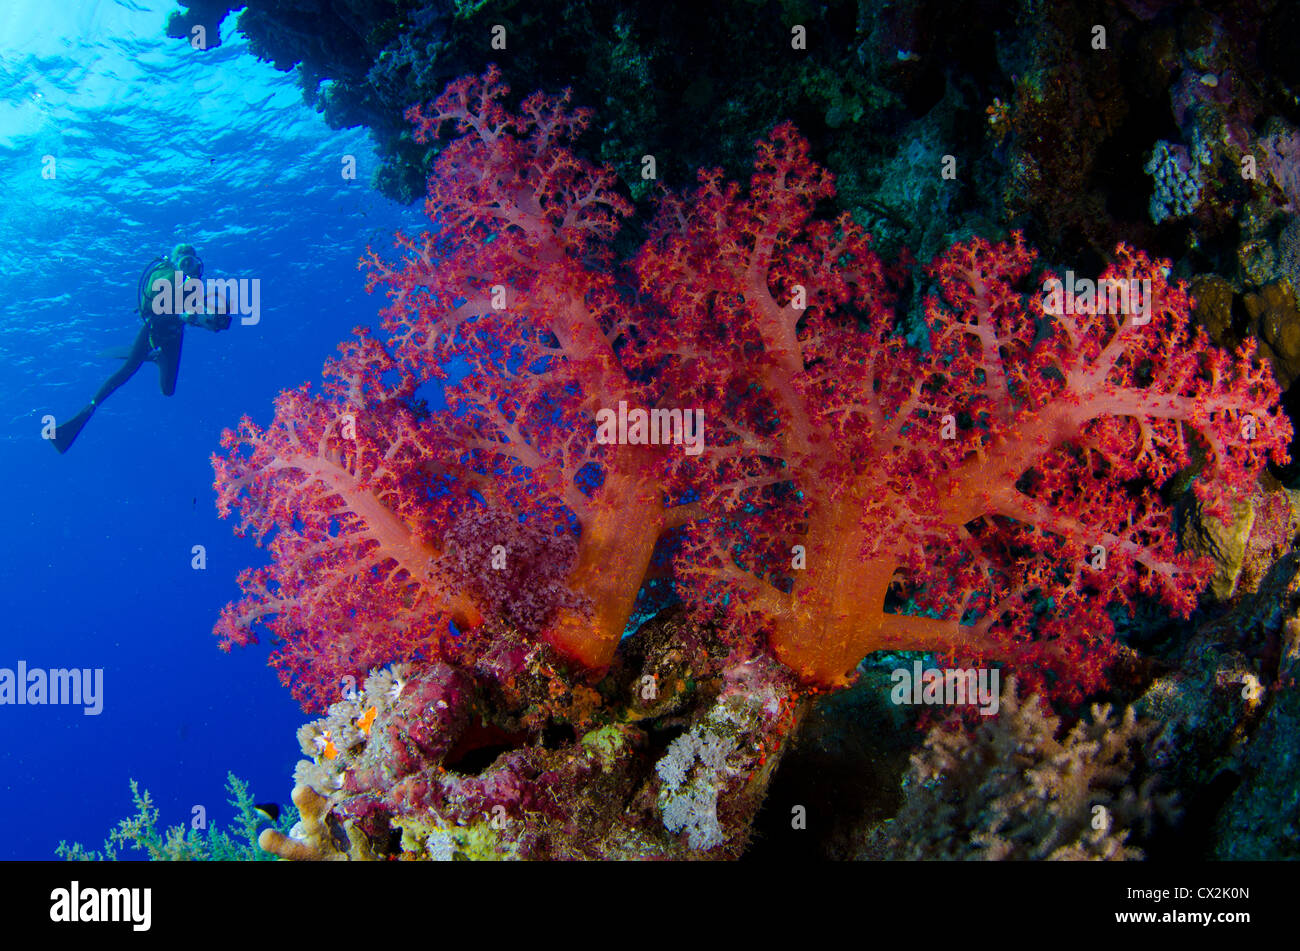 Red Sea, underwater, coral reef, sea life, marine life, ocean, scuba diving, vacation, water, fish, diver, female diver, coral Stock Photo